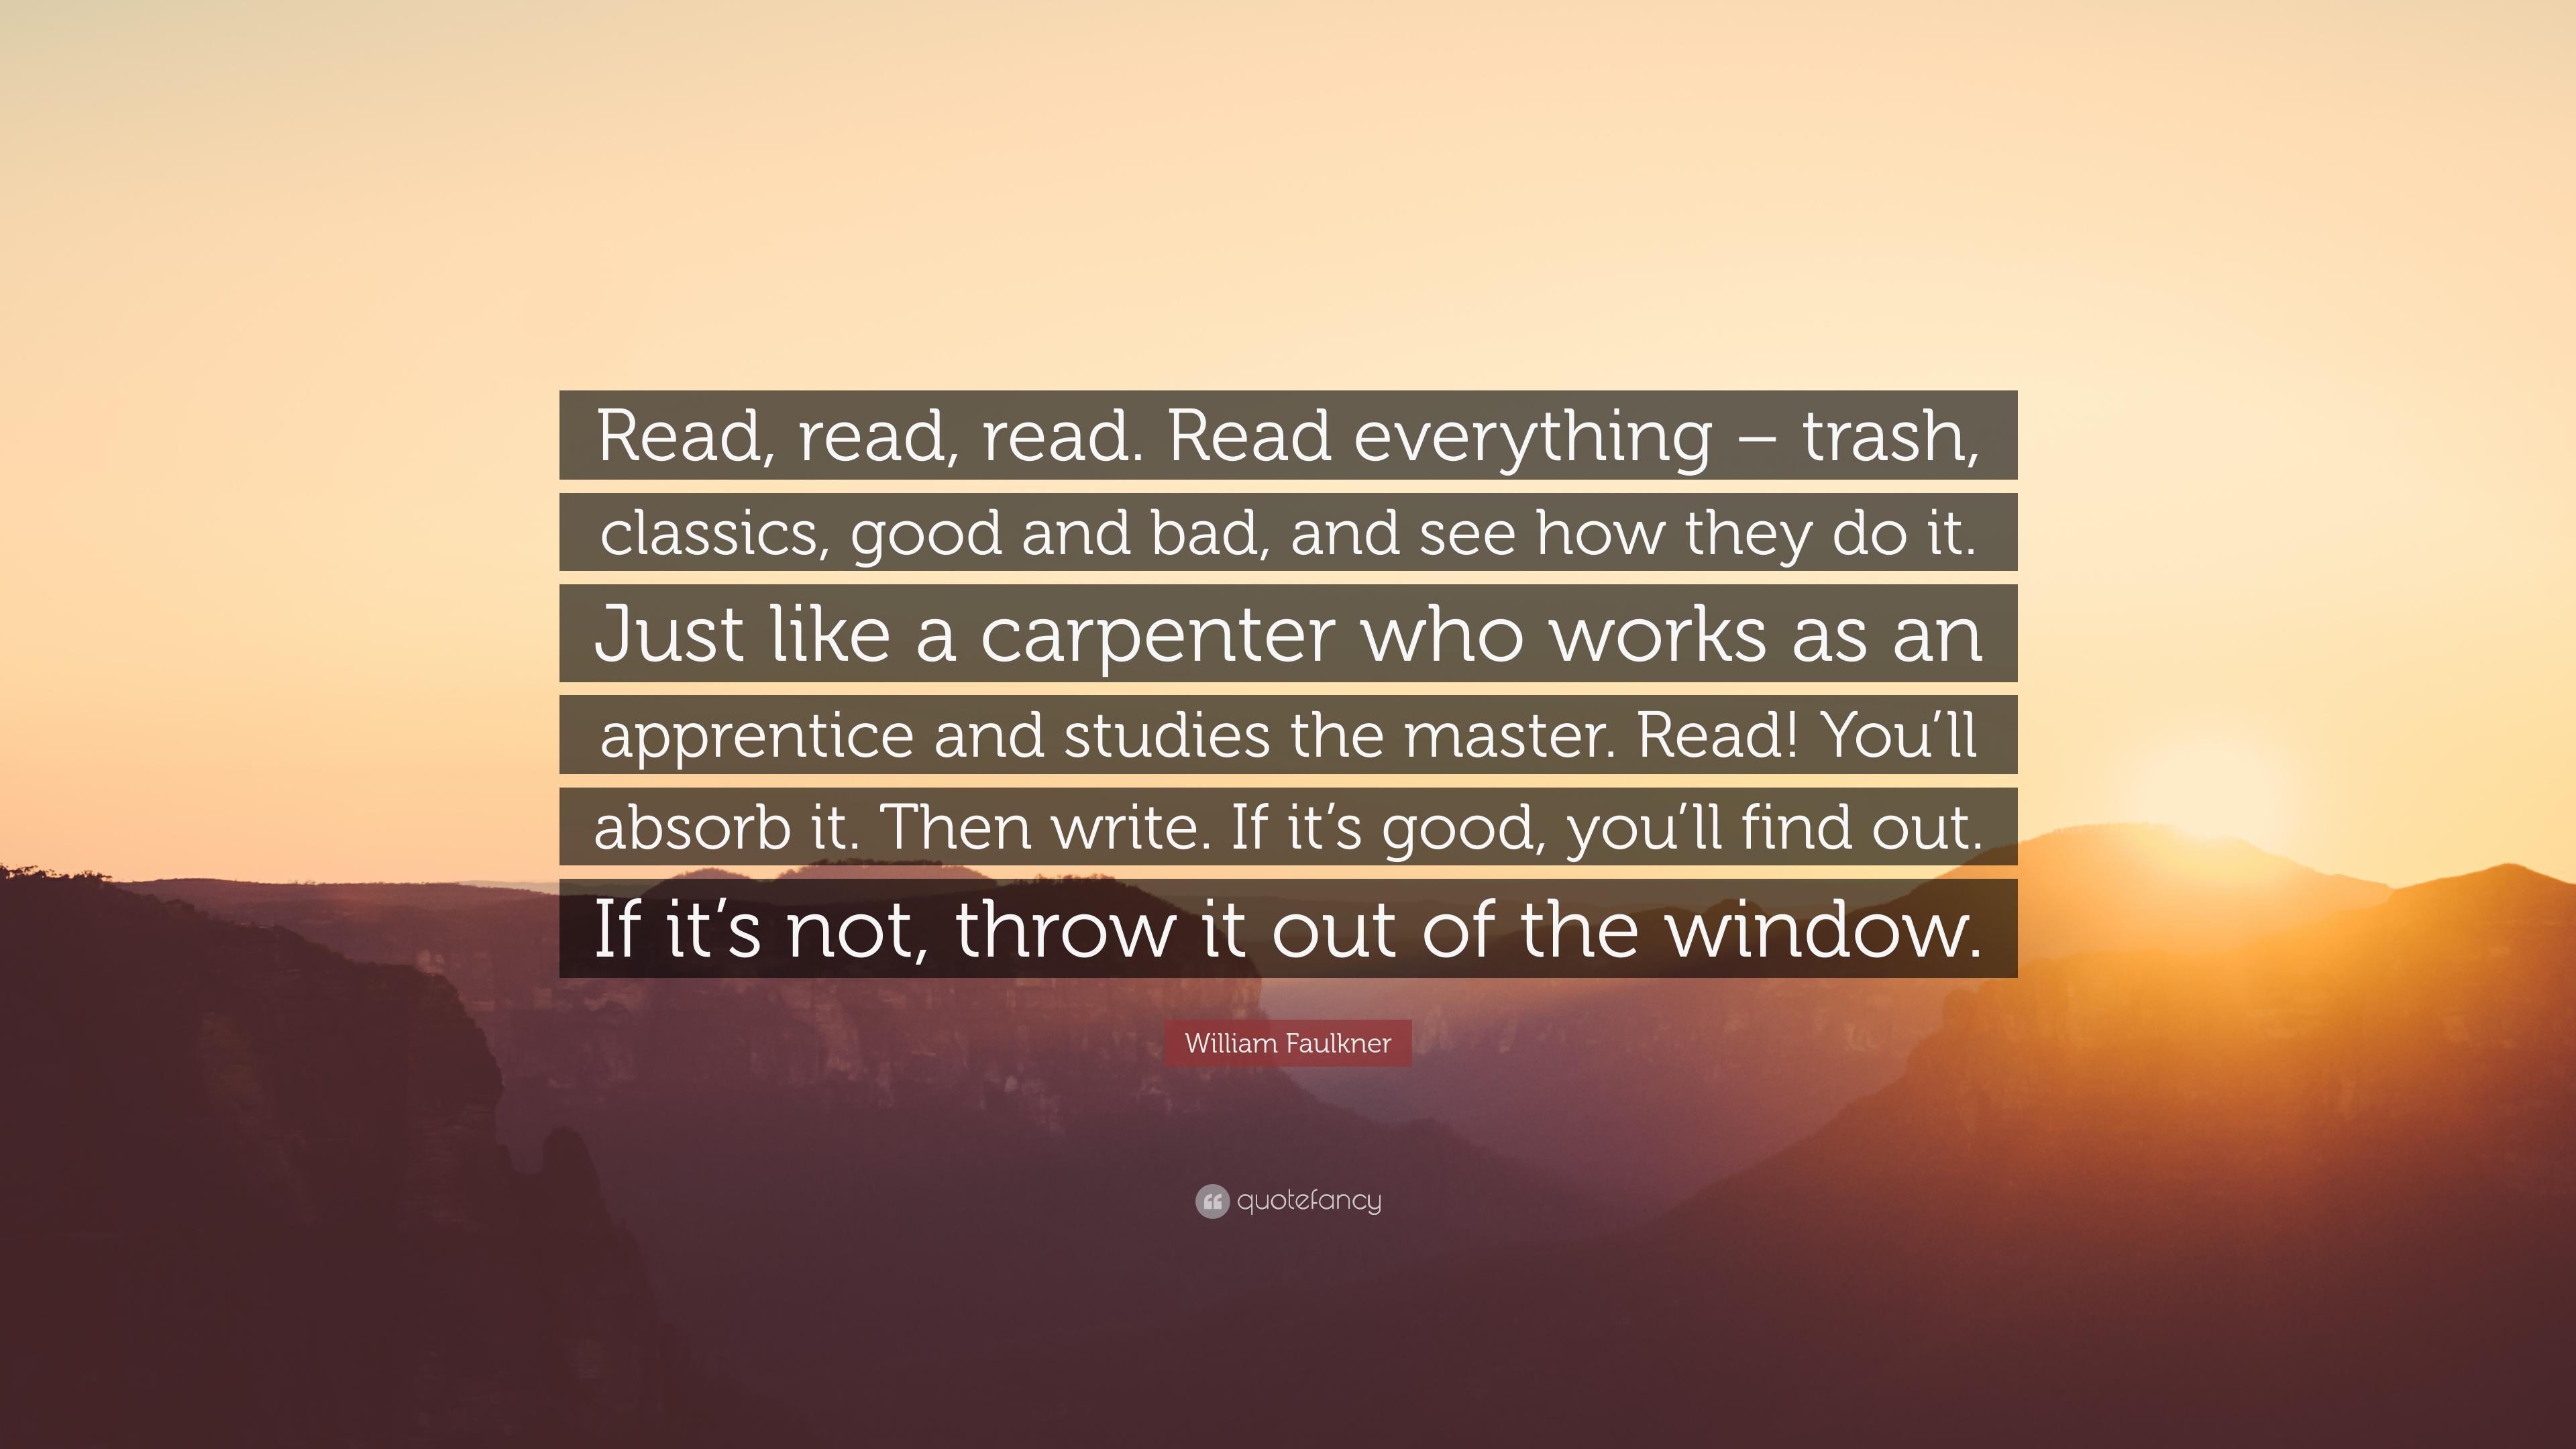 William Faulkner Quote: “Read, read, read. Read everything